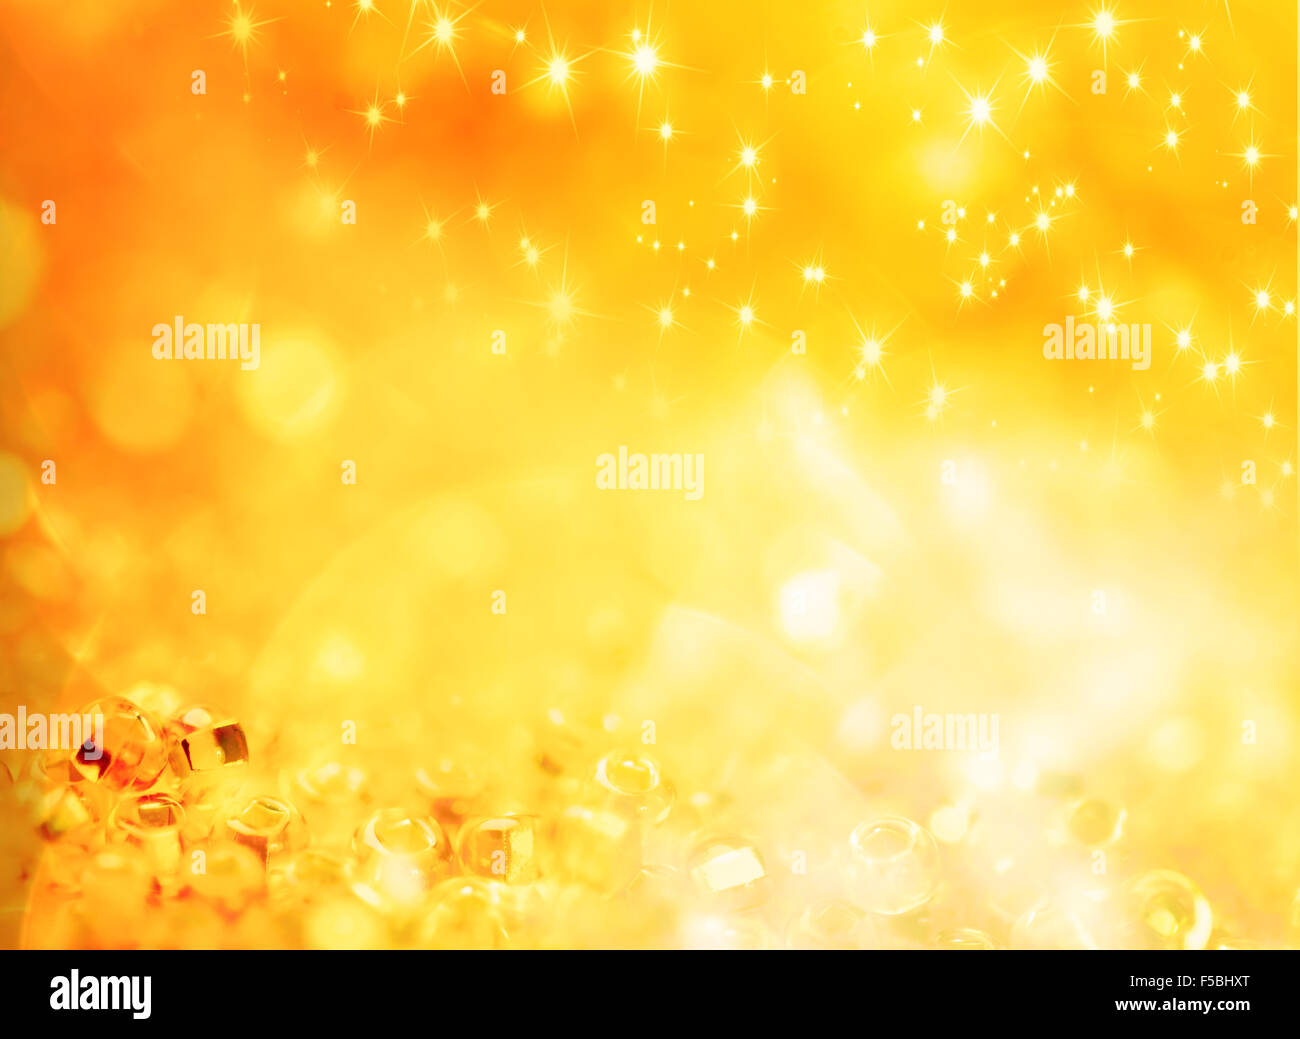 Abstract holiday gold background with stars shapes and lights rounds Stock Photo